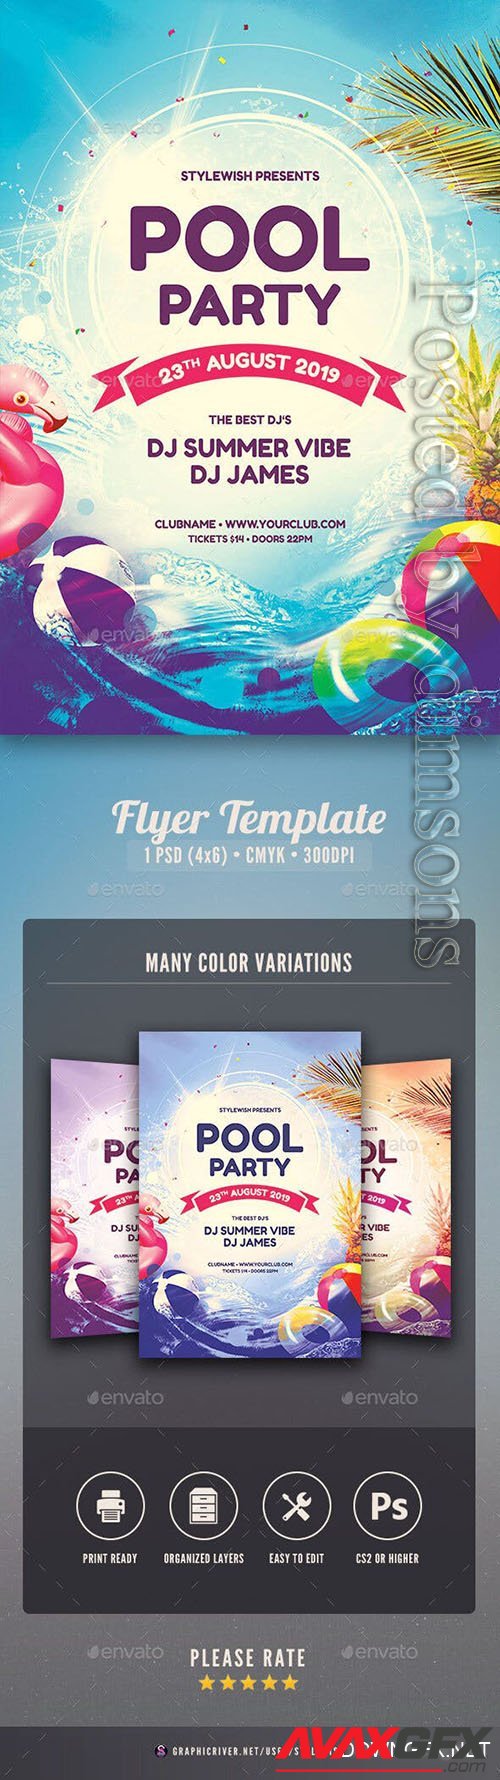 Graphicriver - Pool Party Flyer 23627121